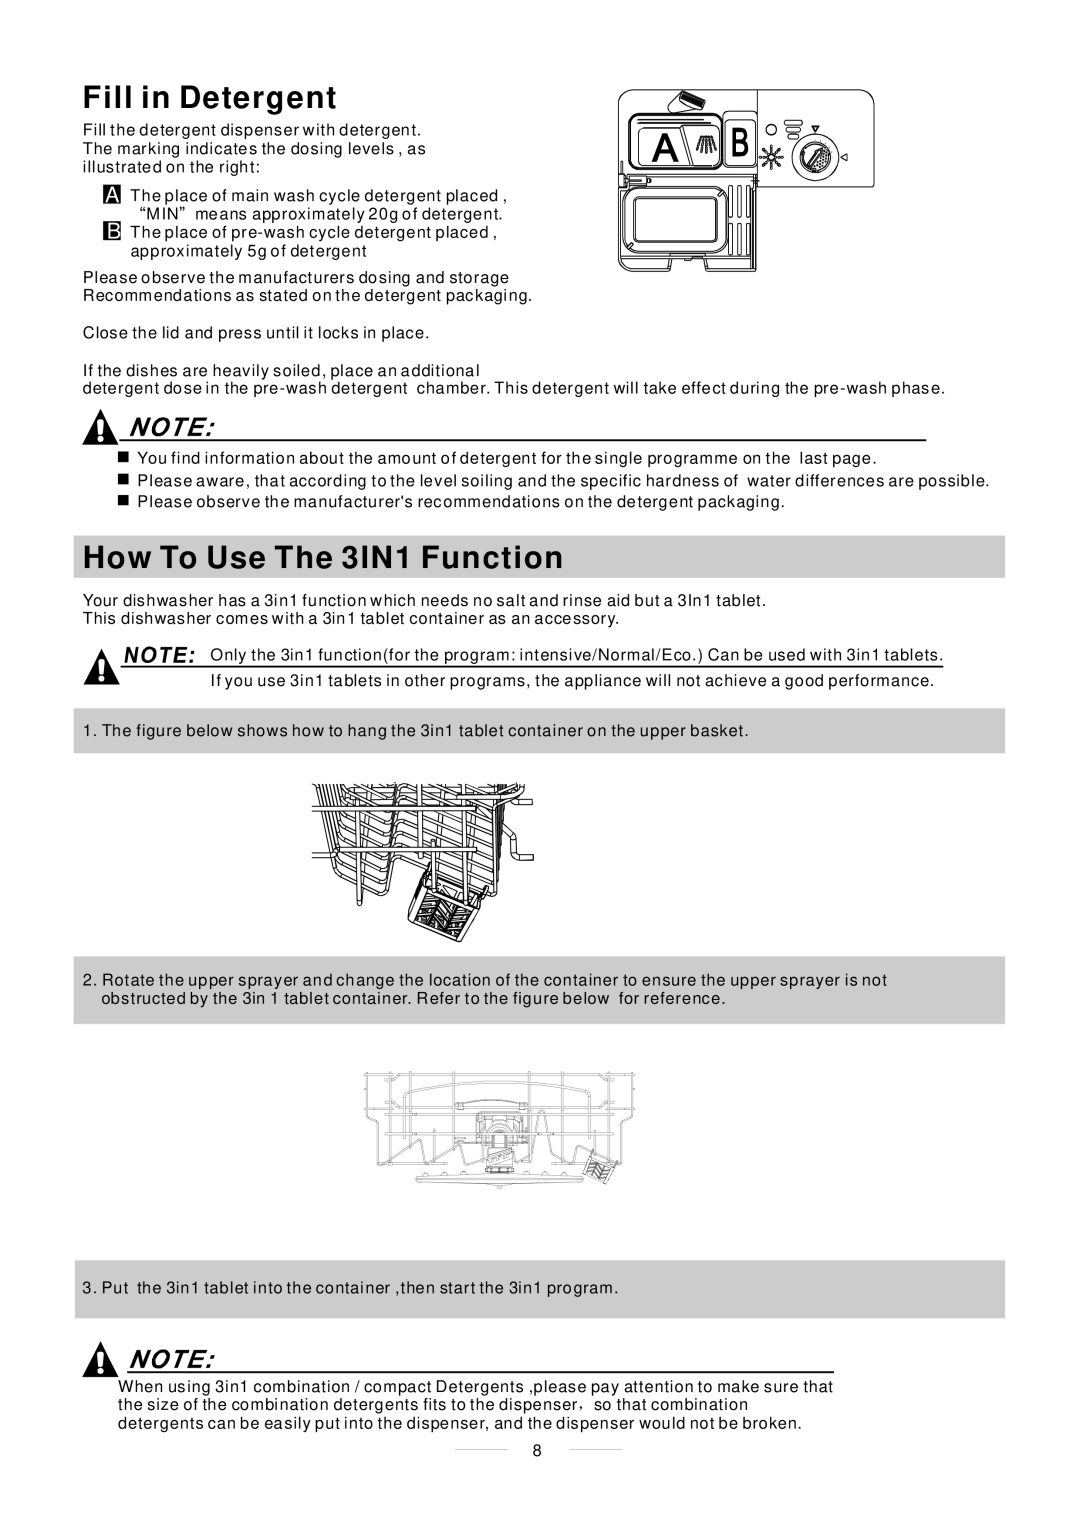 Whirlpool ADP 451 manual Fill in Detergent, How To Use The 3IN1 Function 